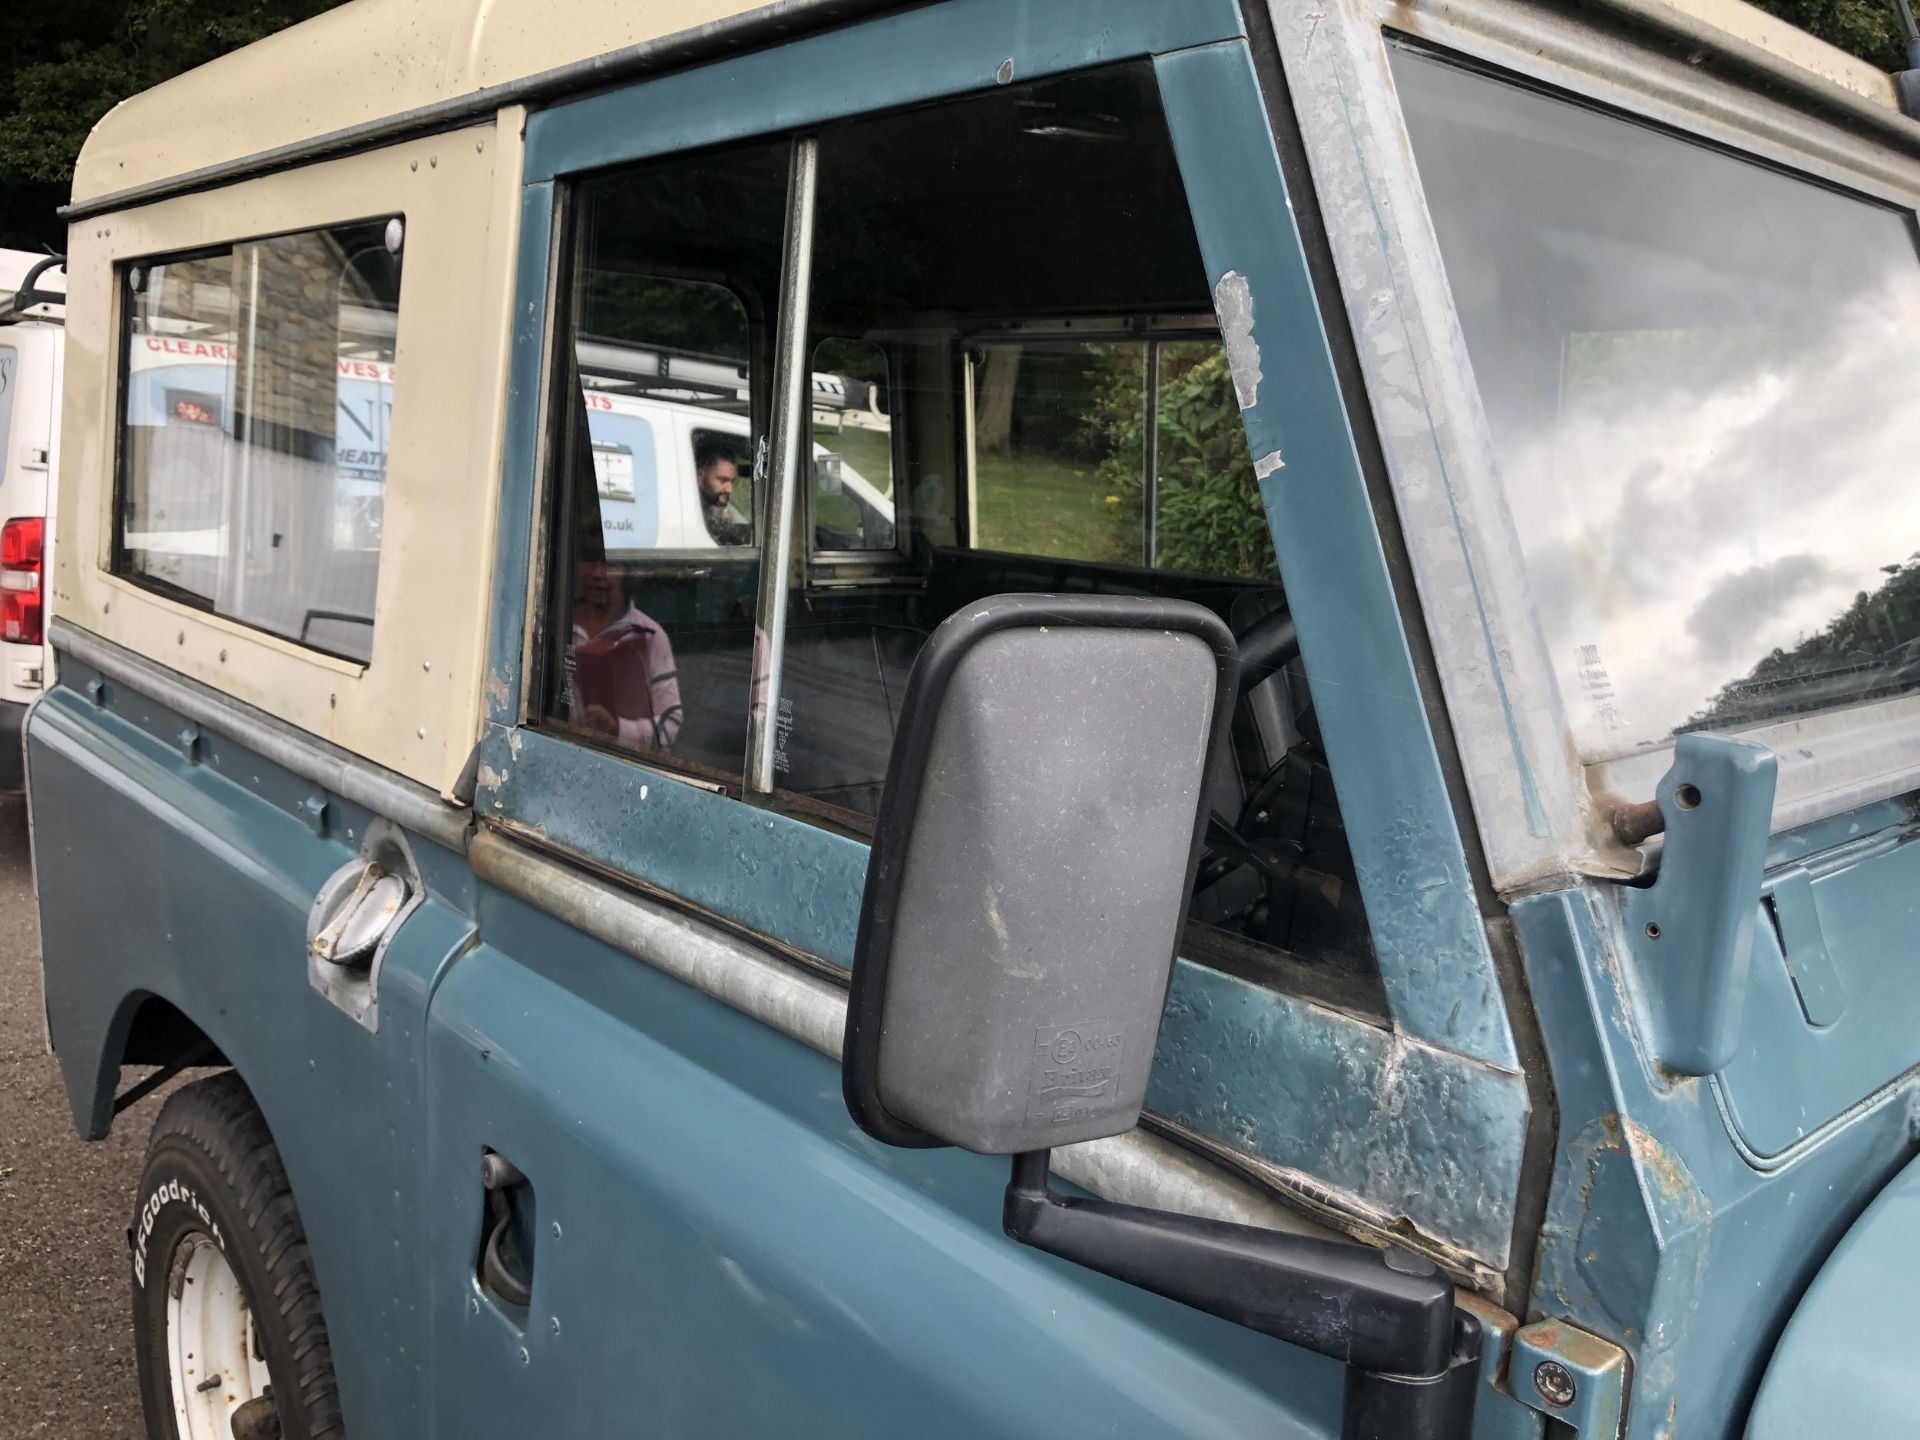 1981 Land Rover 88 inch Series III Registration number KAN 404W Blue with a white roof 2,286 cc - Image 20 of 51